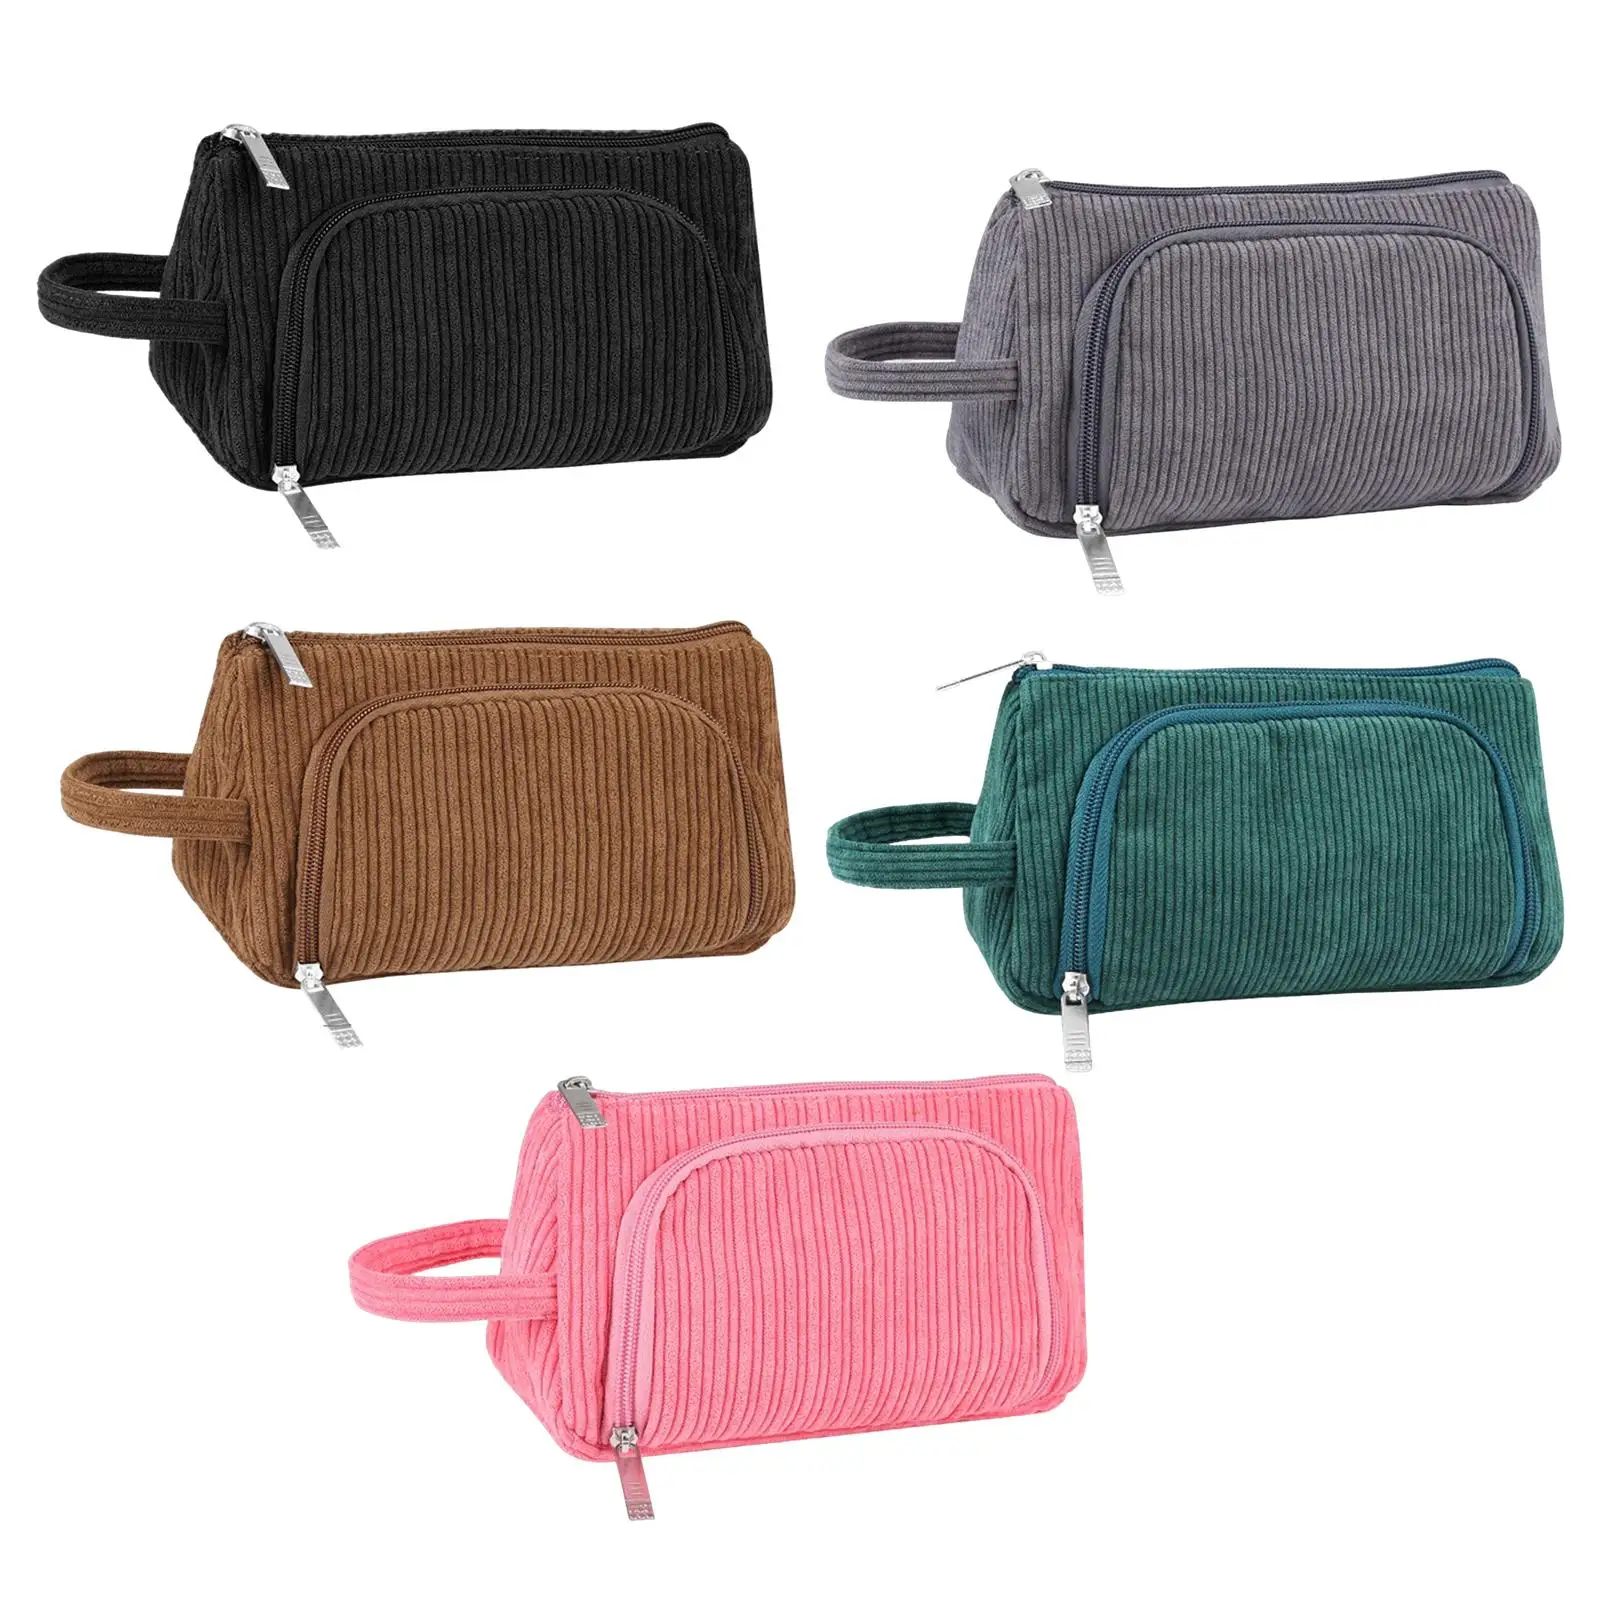 Multifunctional Corduroy Cosmetic Bag Portable Makeup Pouch for Accessories, Shampoo, Personal Items with Handle Case Practical